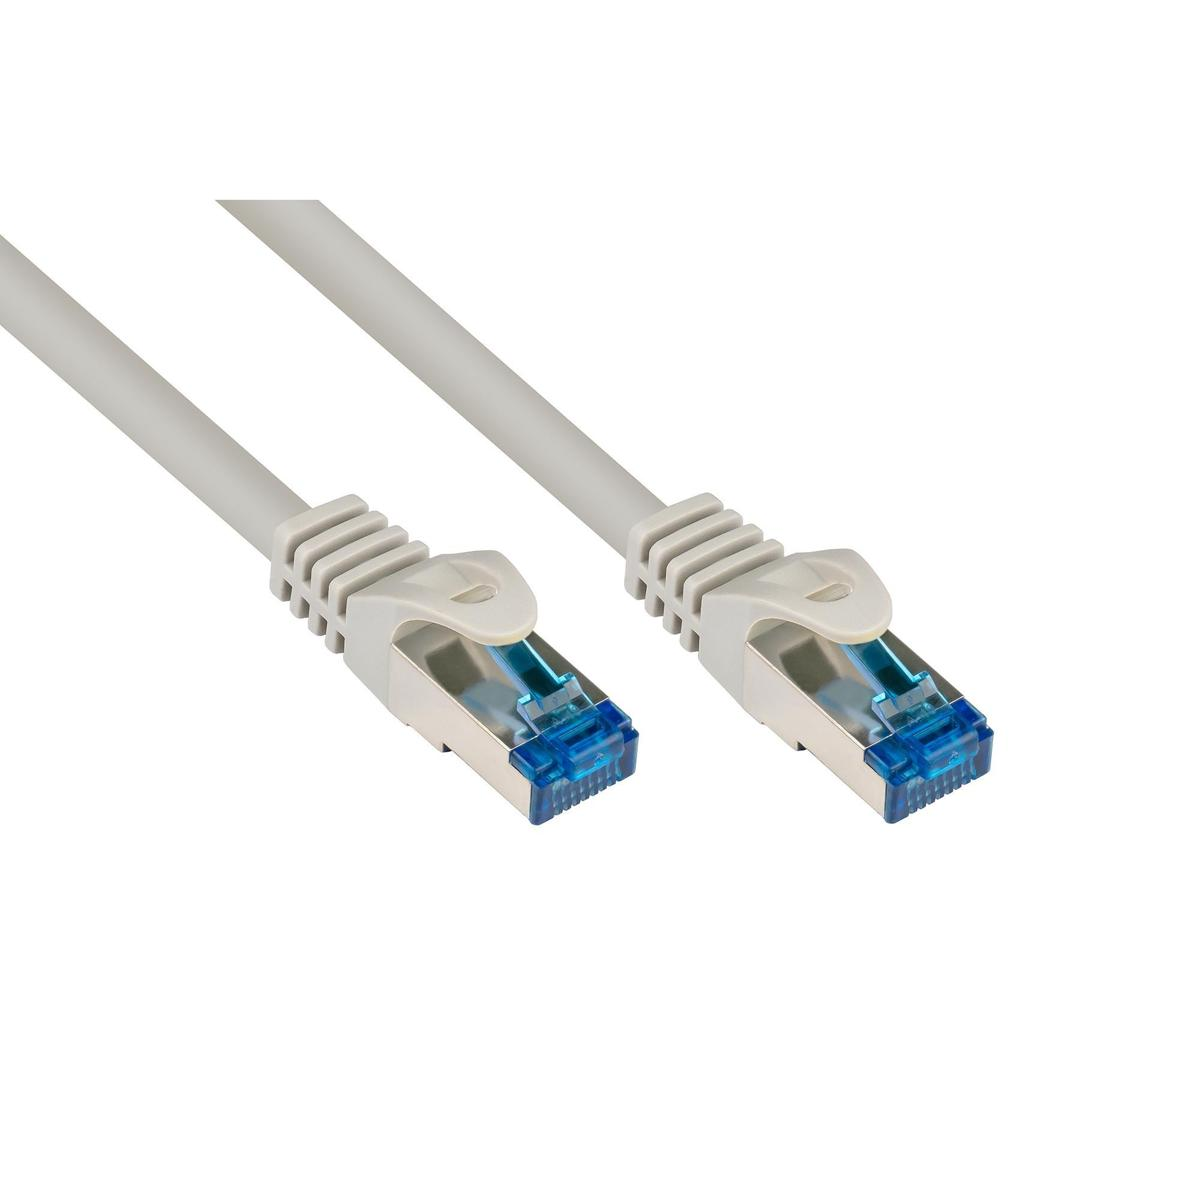 VARIA GROUP Grau 8060-SF003 Patchcable Cat.6a